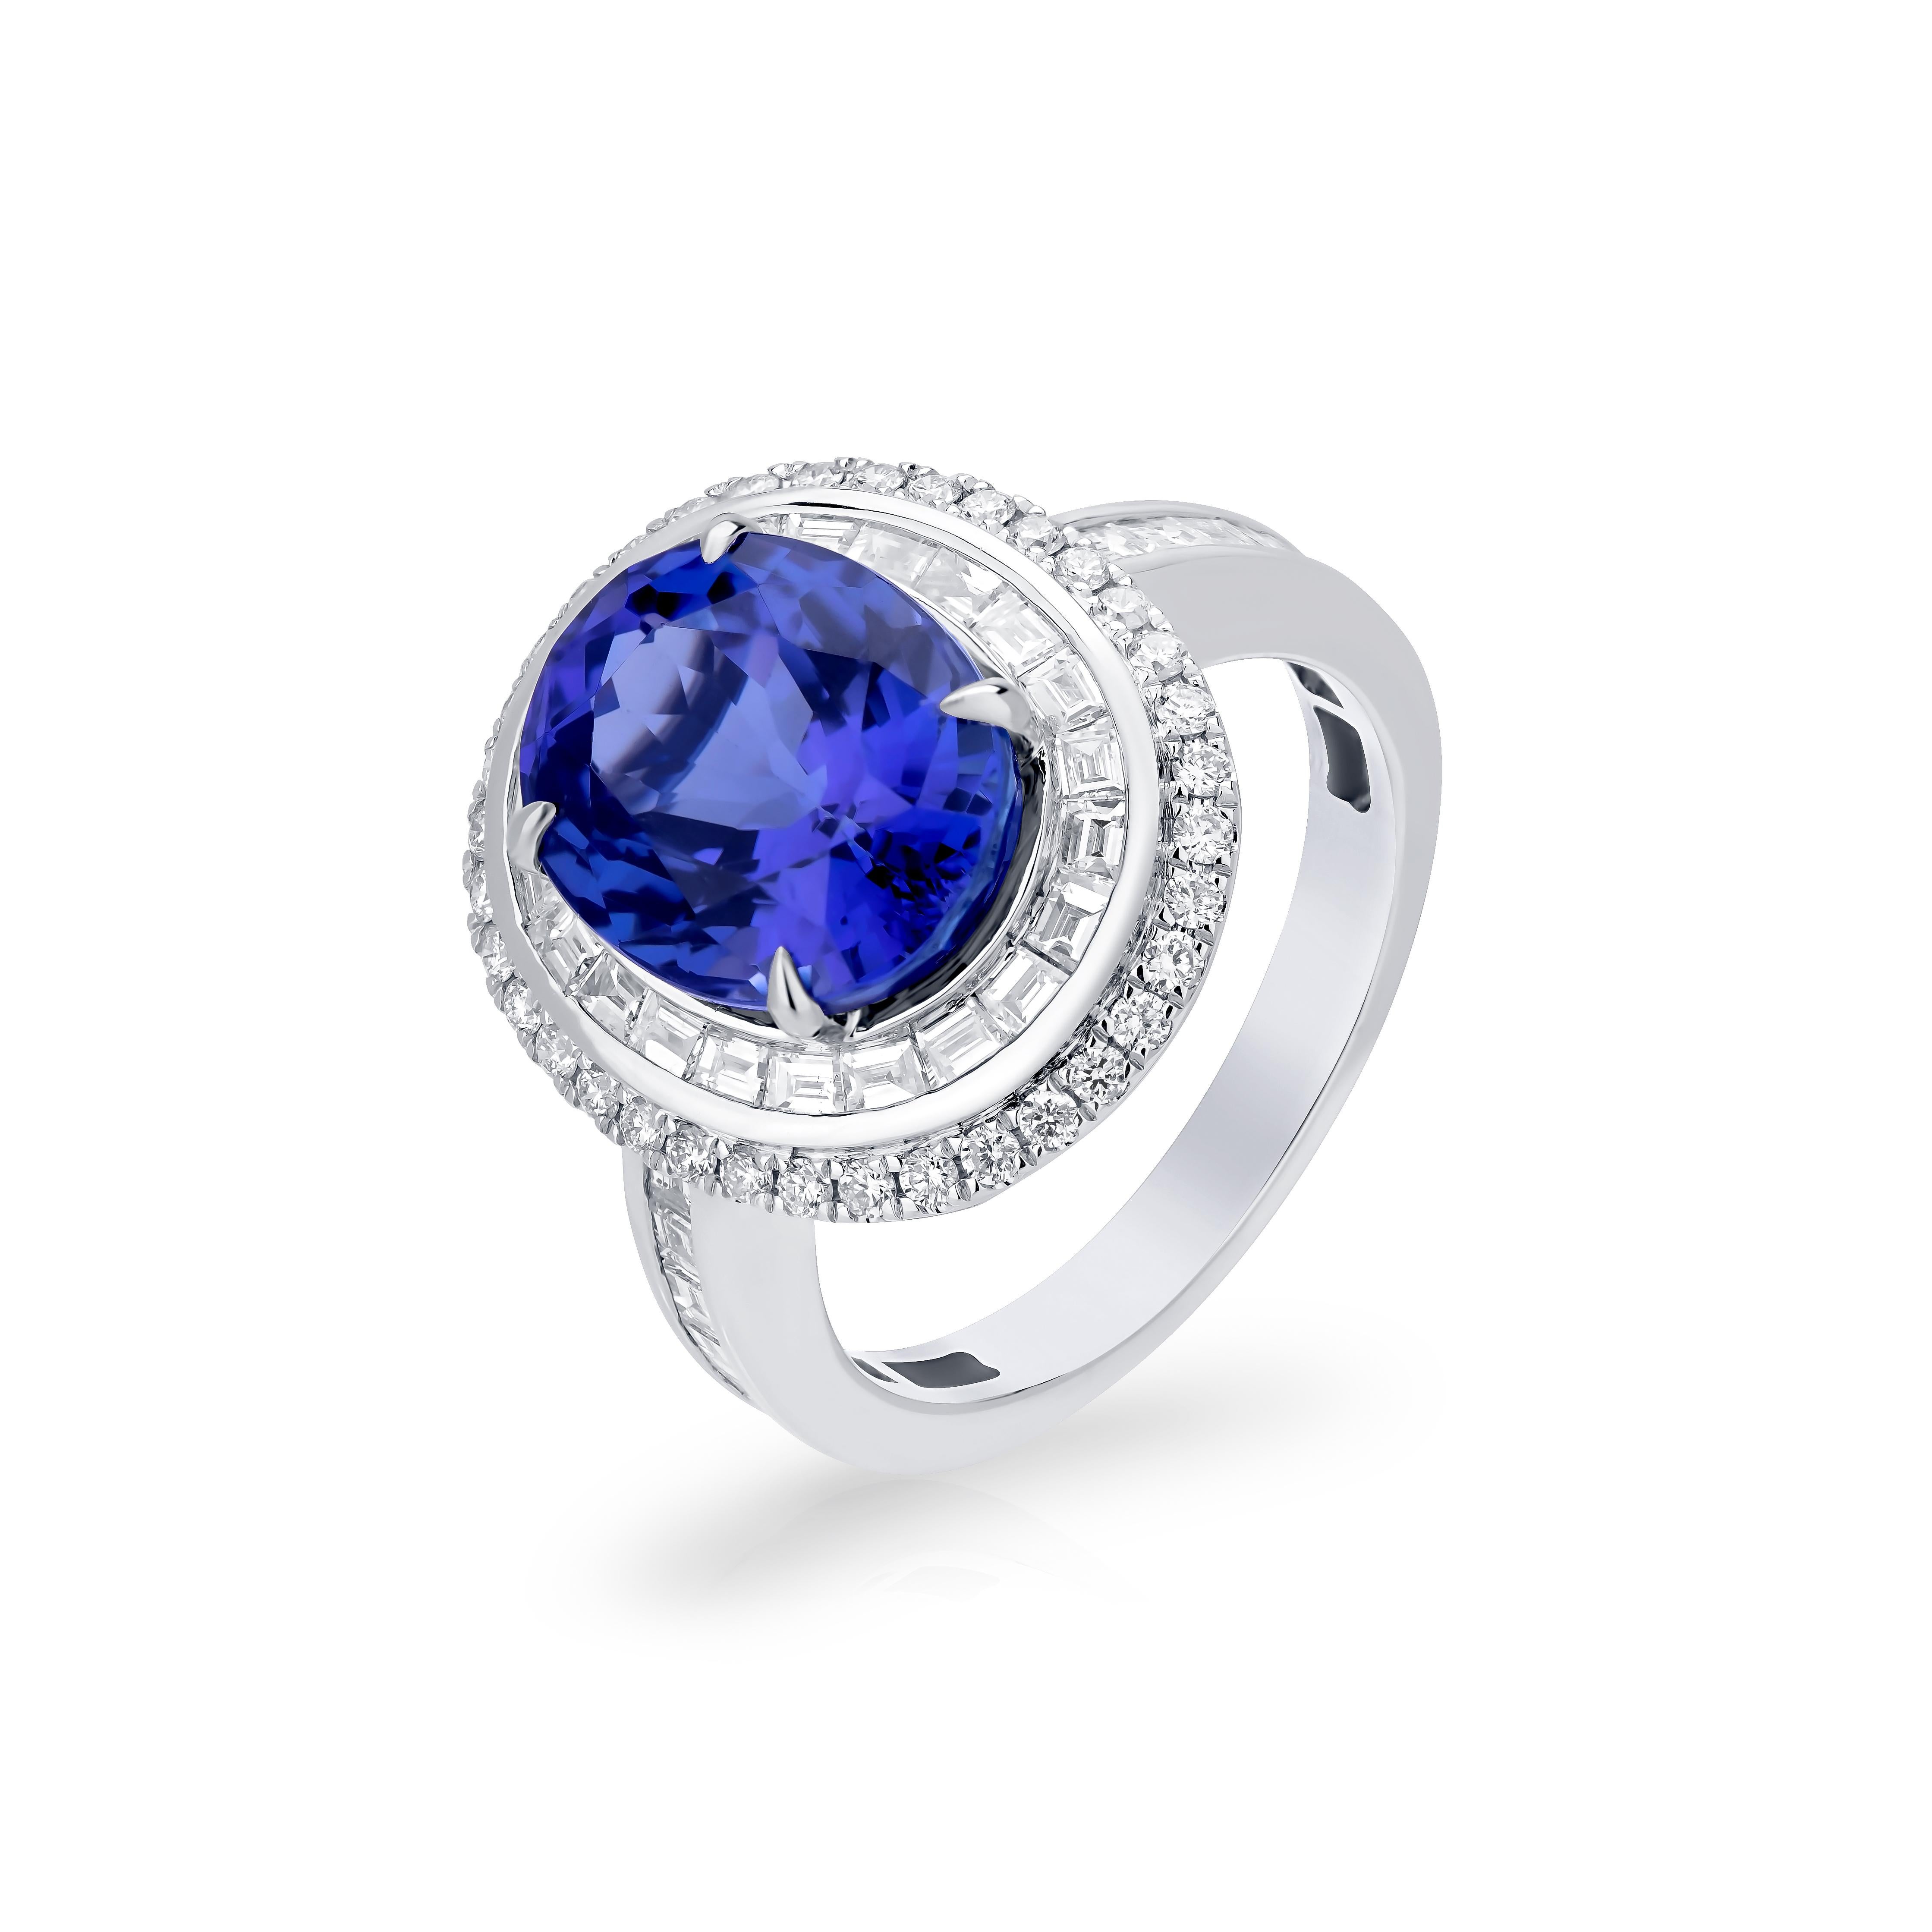 This stunning Nigaam ring crafted in 18K White Gold is a sublime and classy piece. The 5.41 Cts Tanzanite in the center of the ring creates a focal point for this beautiful ring. Surrounded by 1.25 Cts round and baguette-shaped full-cut diamonds